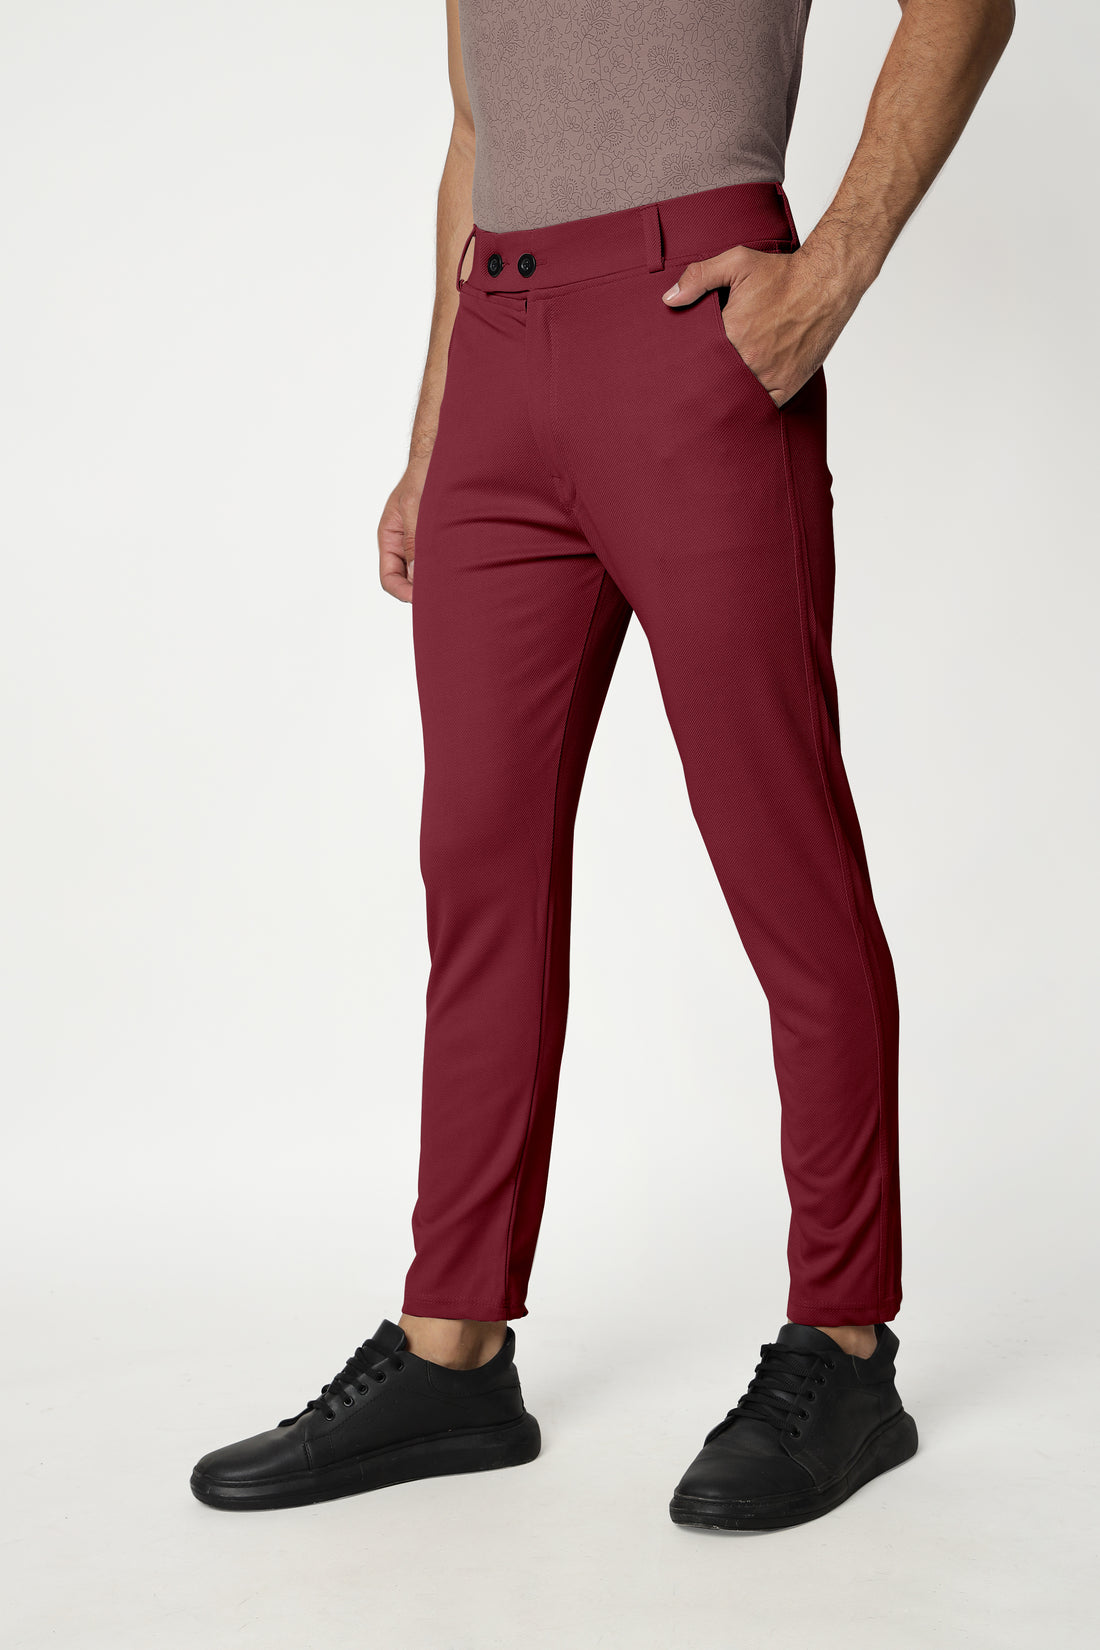 Maroon Lycra Stretchable Formal Slim Fit  Trouser Pant